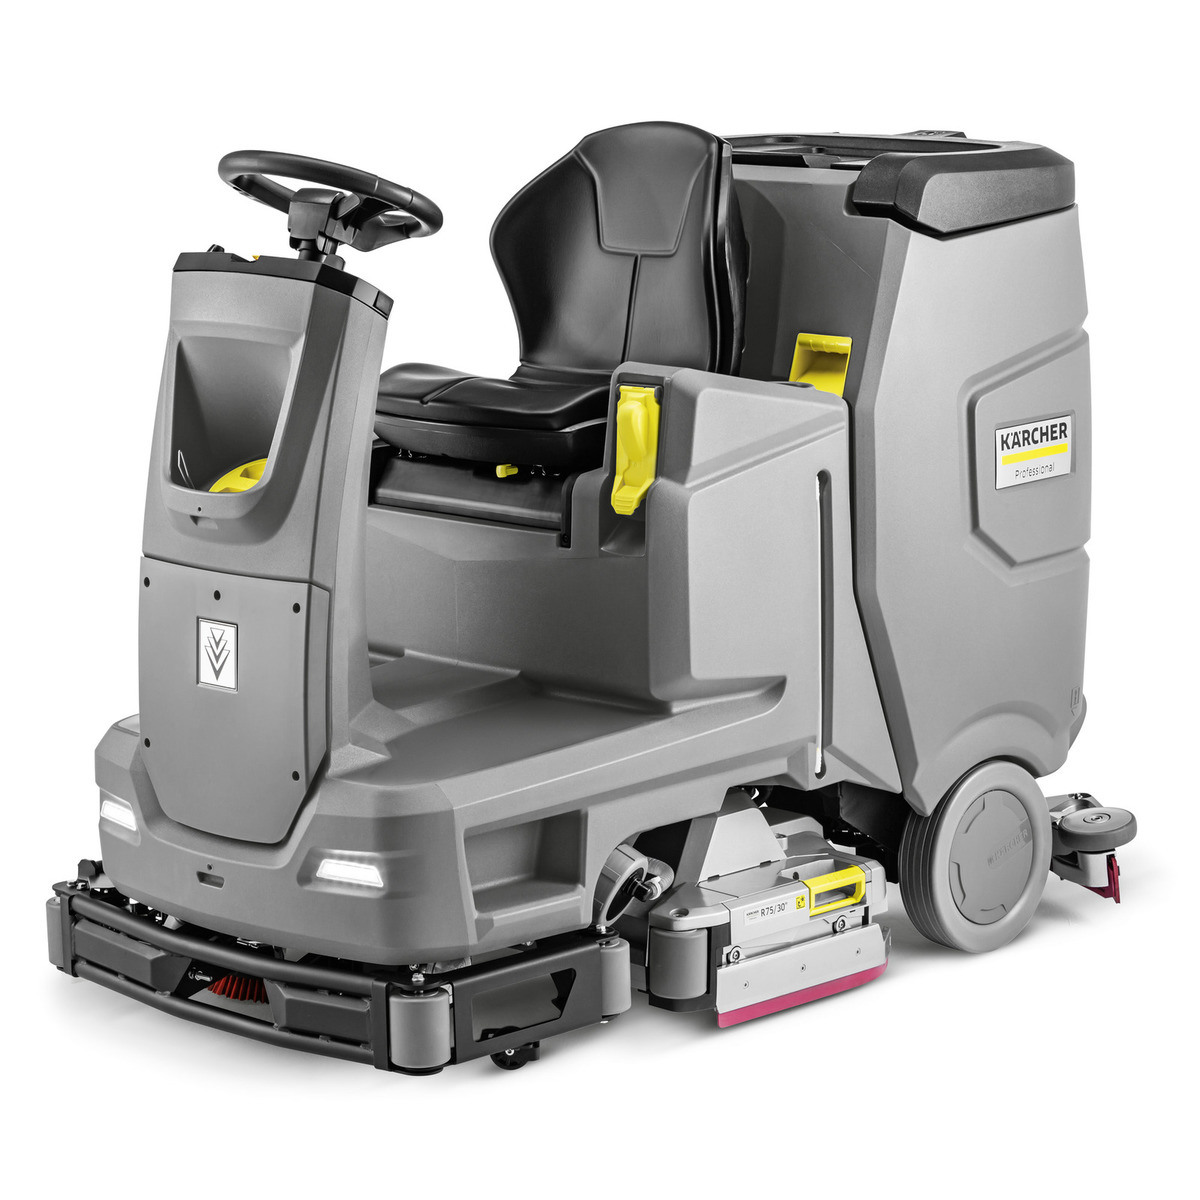 Karcher B 75/110 R BP karcher, ride, on, B, 75/110, R, BP, commercial, auto-scrubber, floor, cleaning, scrubber, professional, clean, maintenance, easy, large-area, 